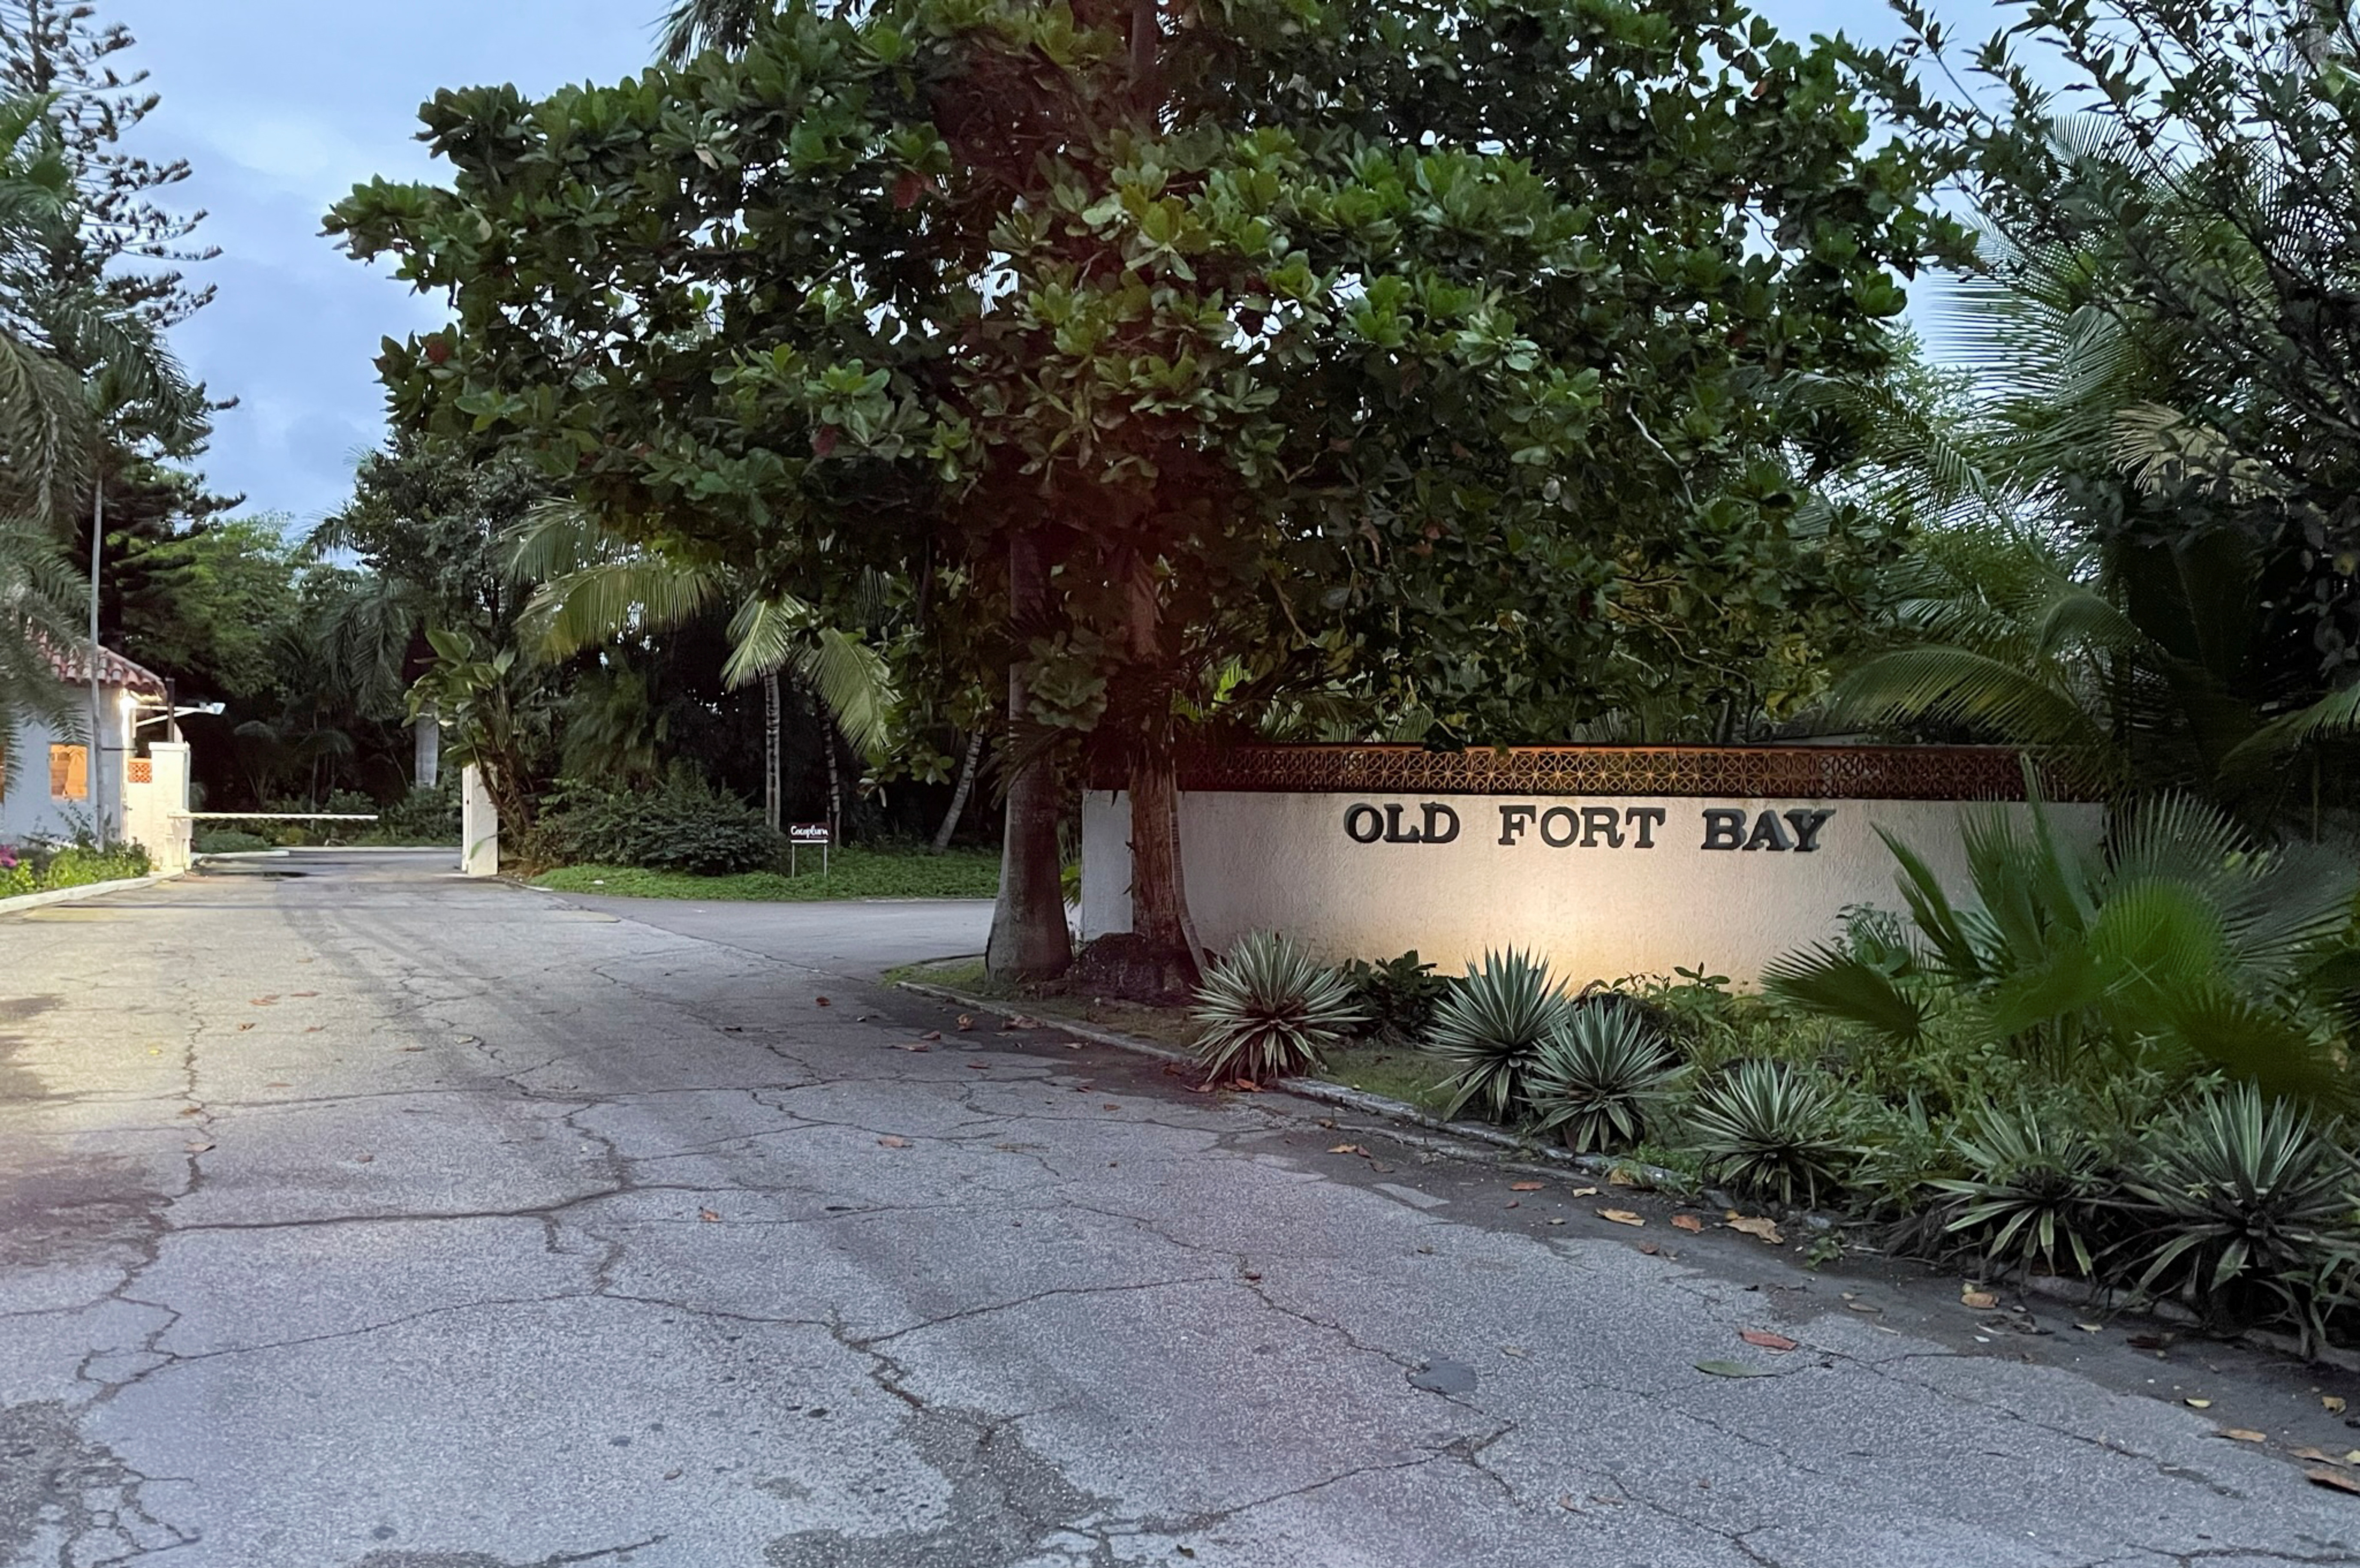 View of the entrance to Old Fort Bay, a gated community, in Bahamas